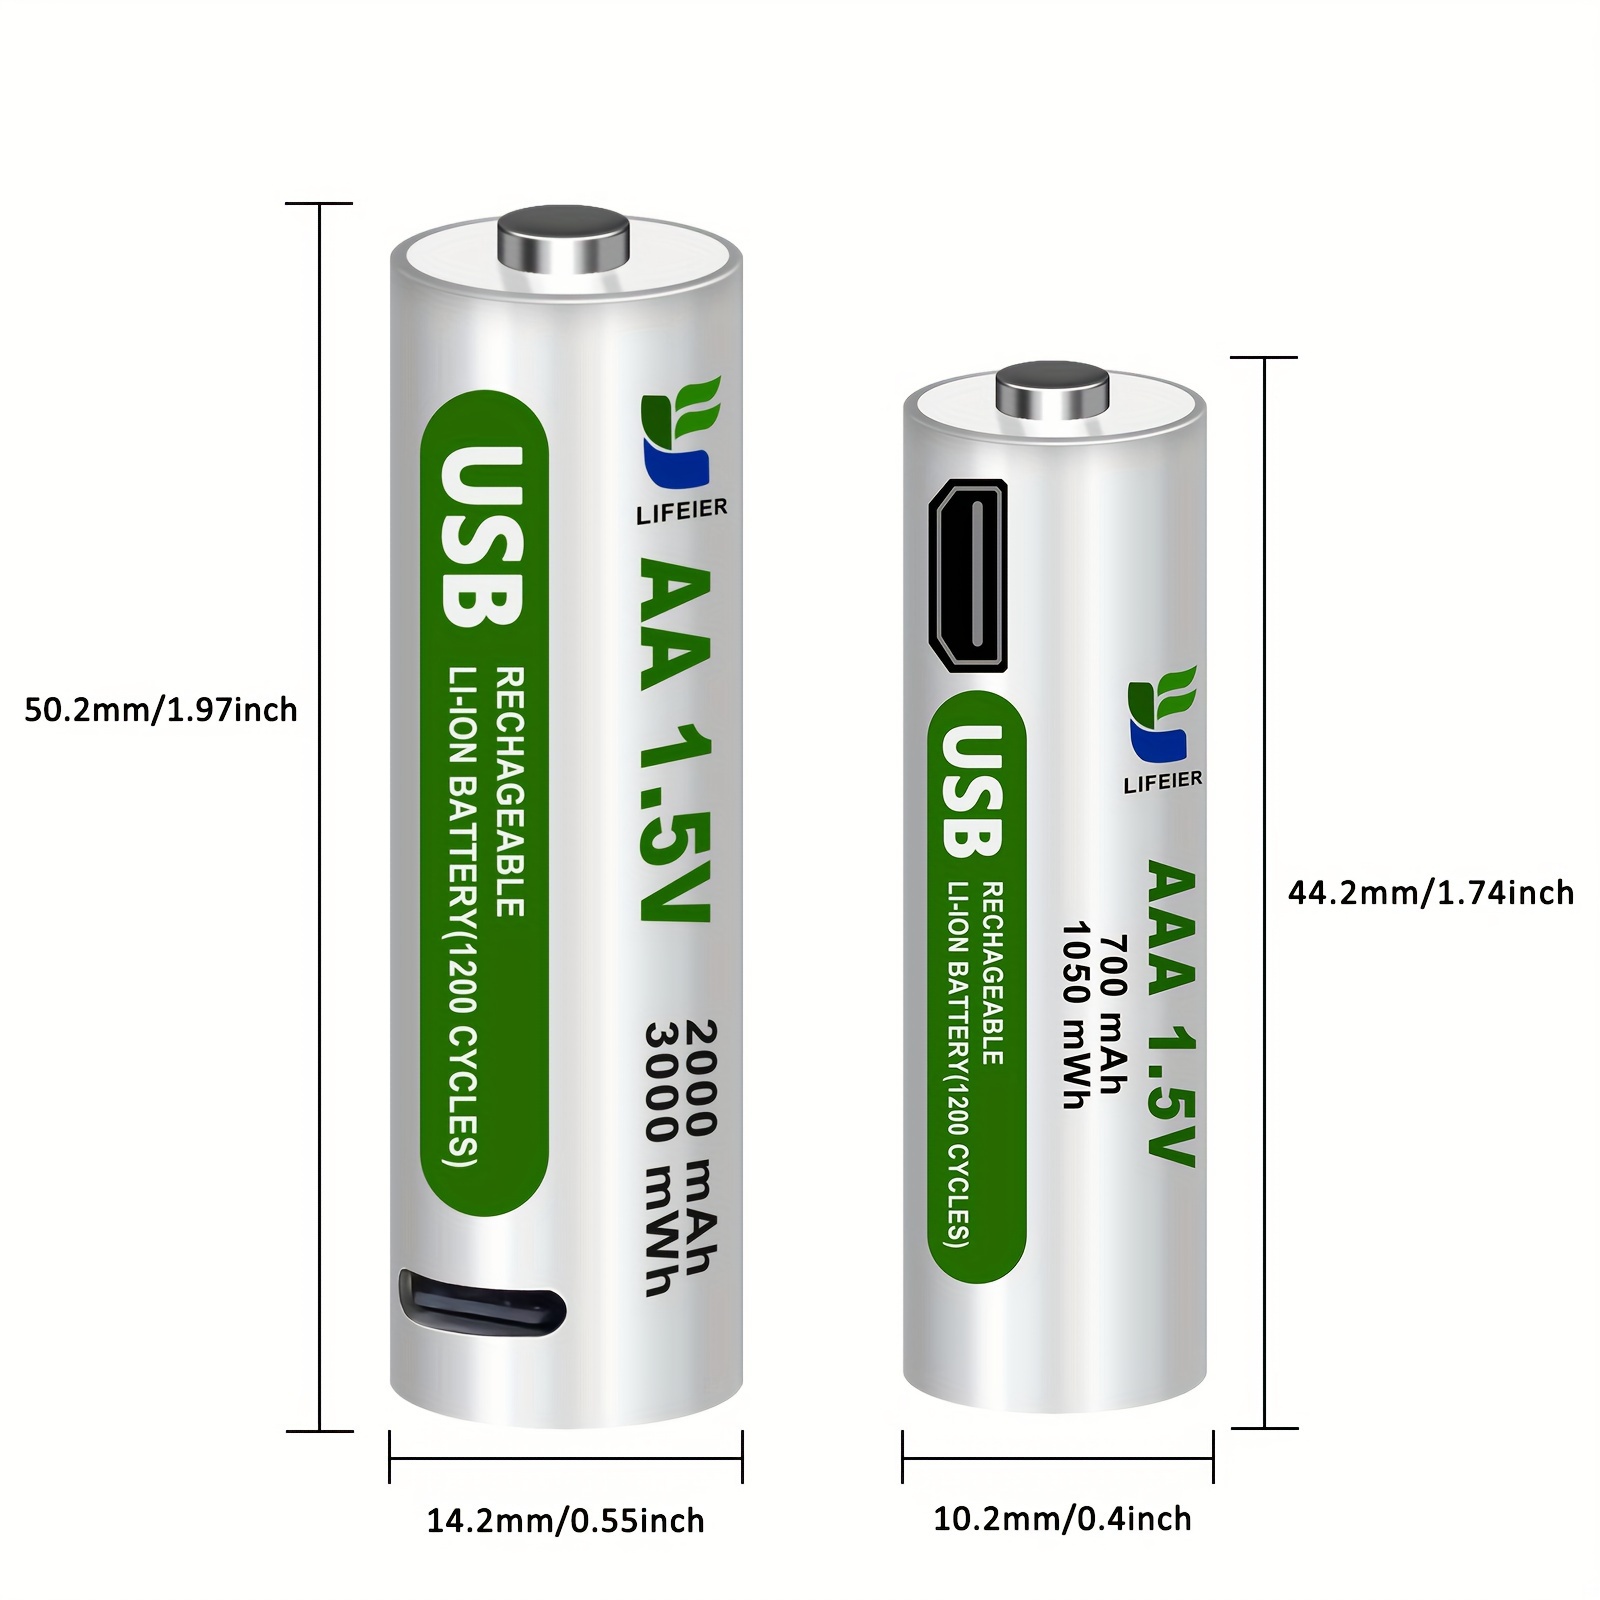 4pack USB AA AAA Rechargeable Battery 1.5V Fast Charger Type C Cable